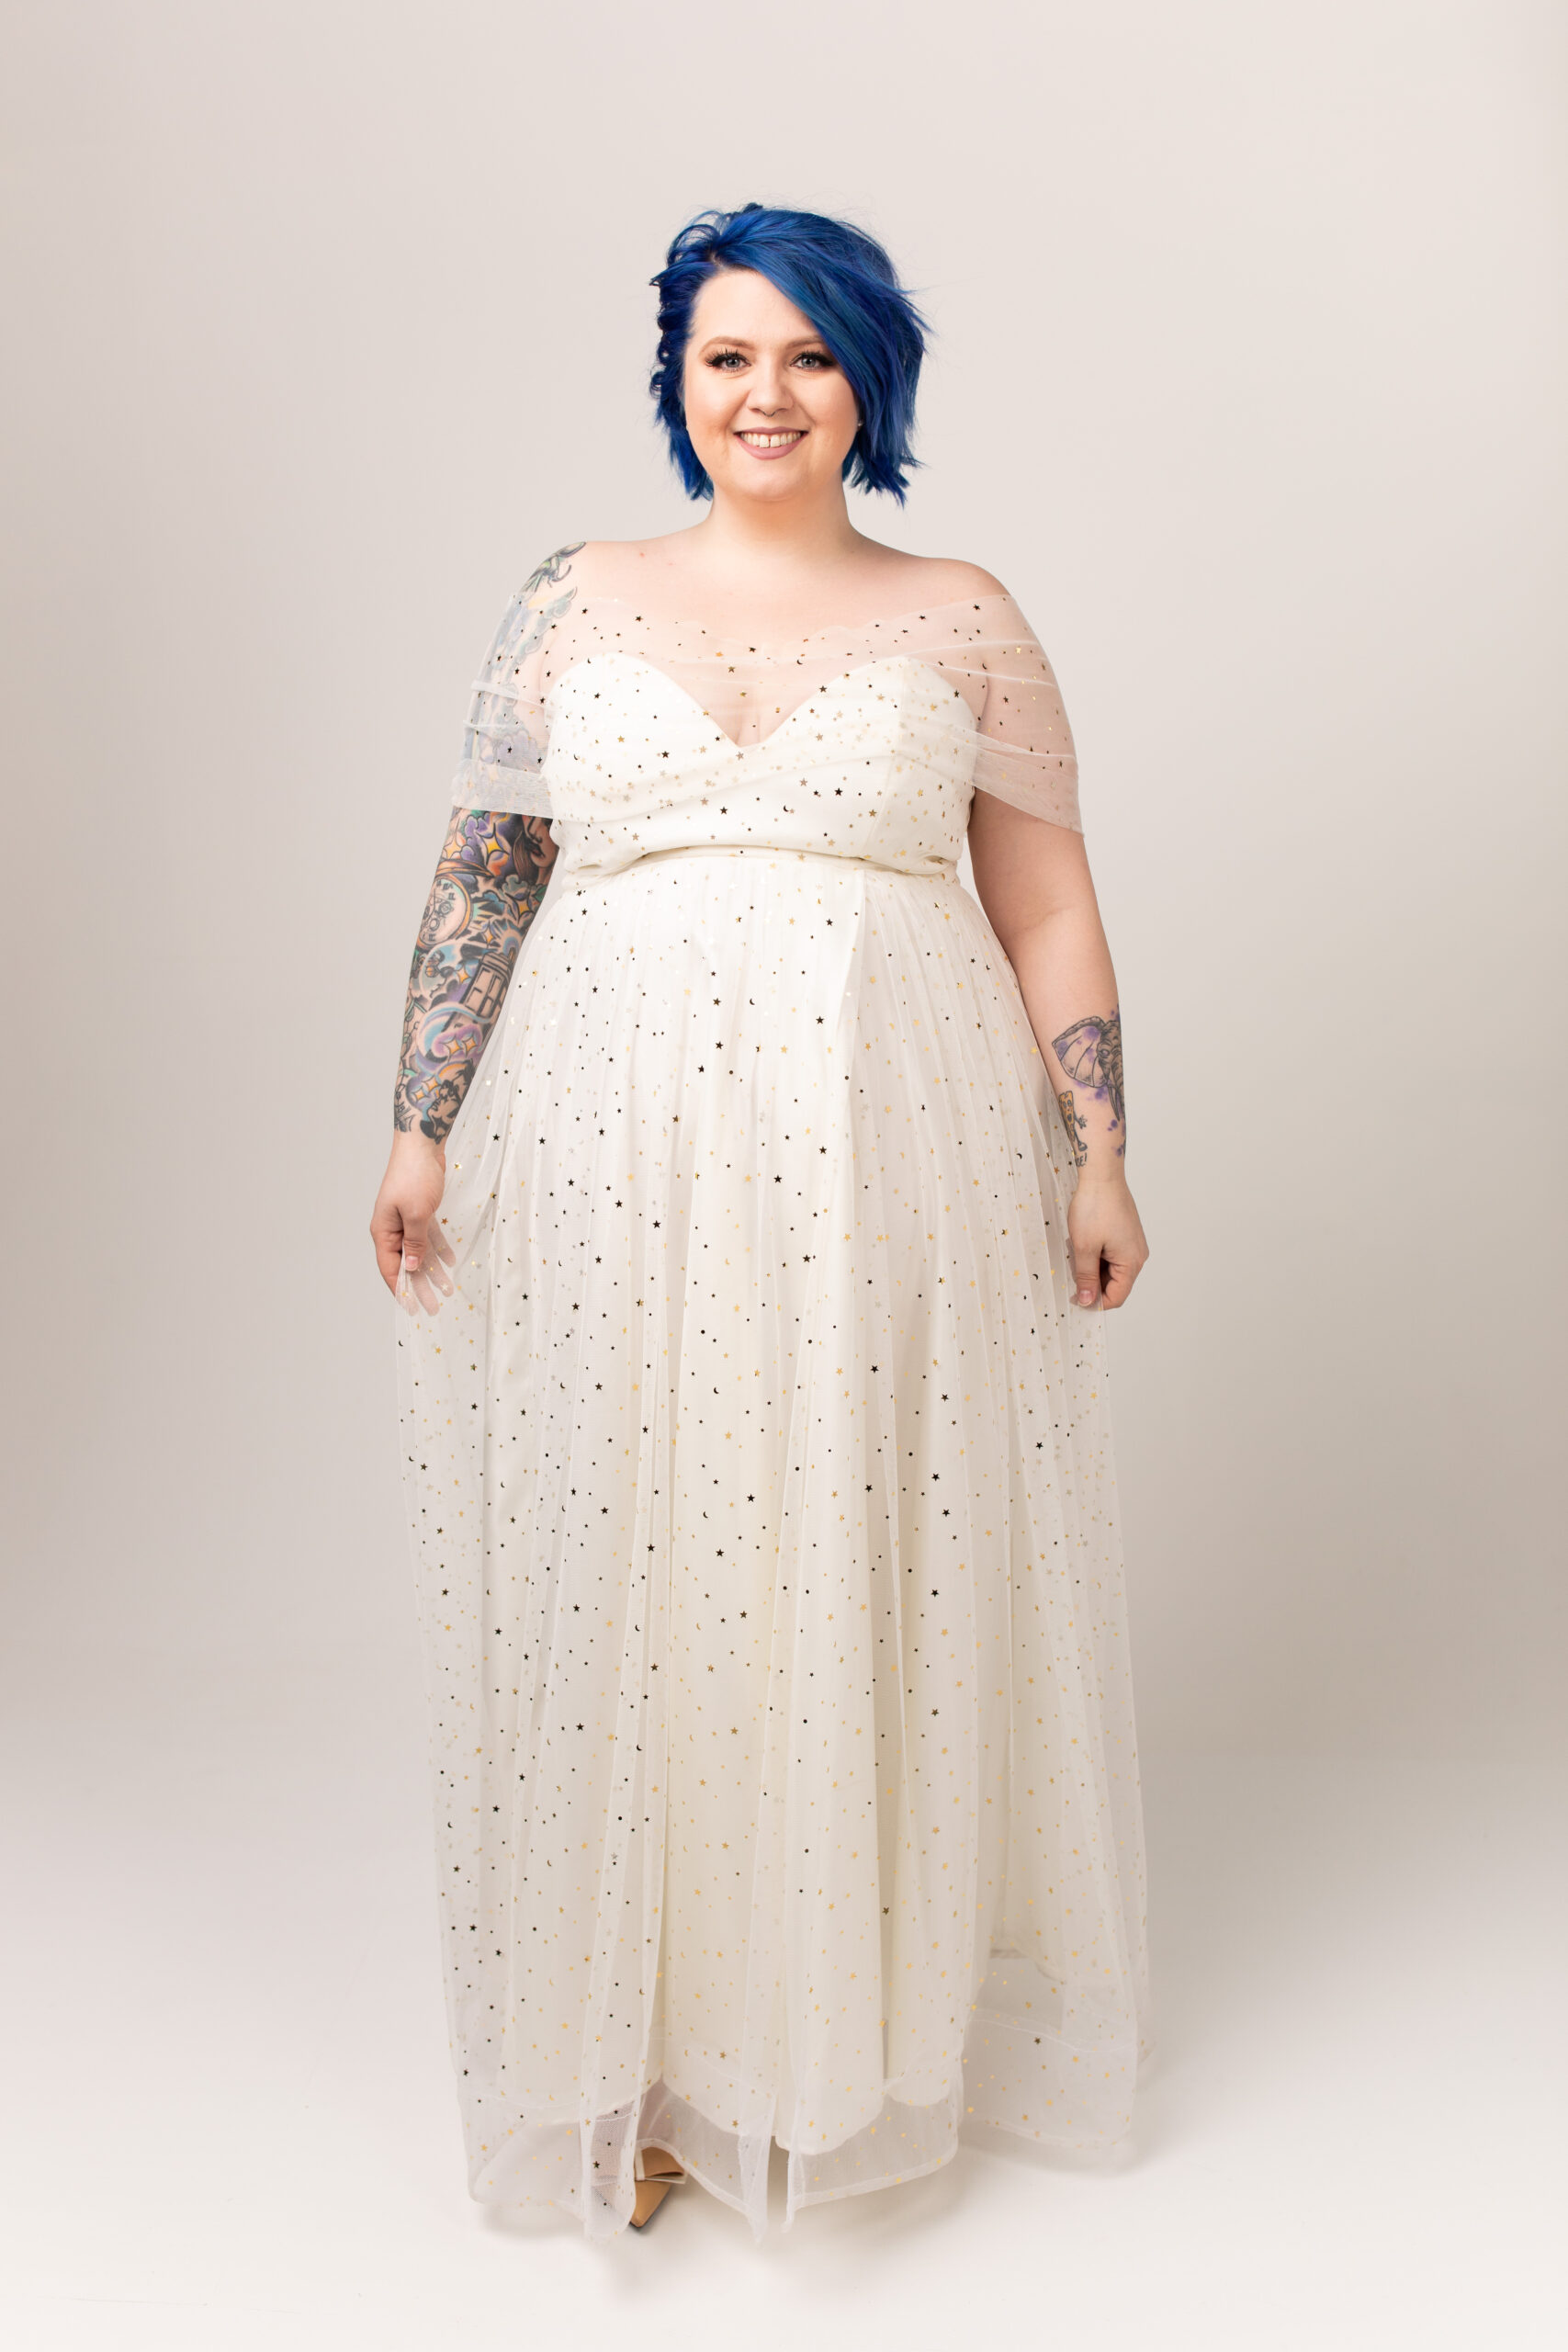 Hannah Caroline Couture is hosting a spectacular plus size Bridal Sample Sale, and you won't want to miss out on this chance to find the gown of your dreams.